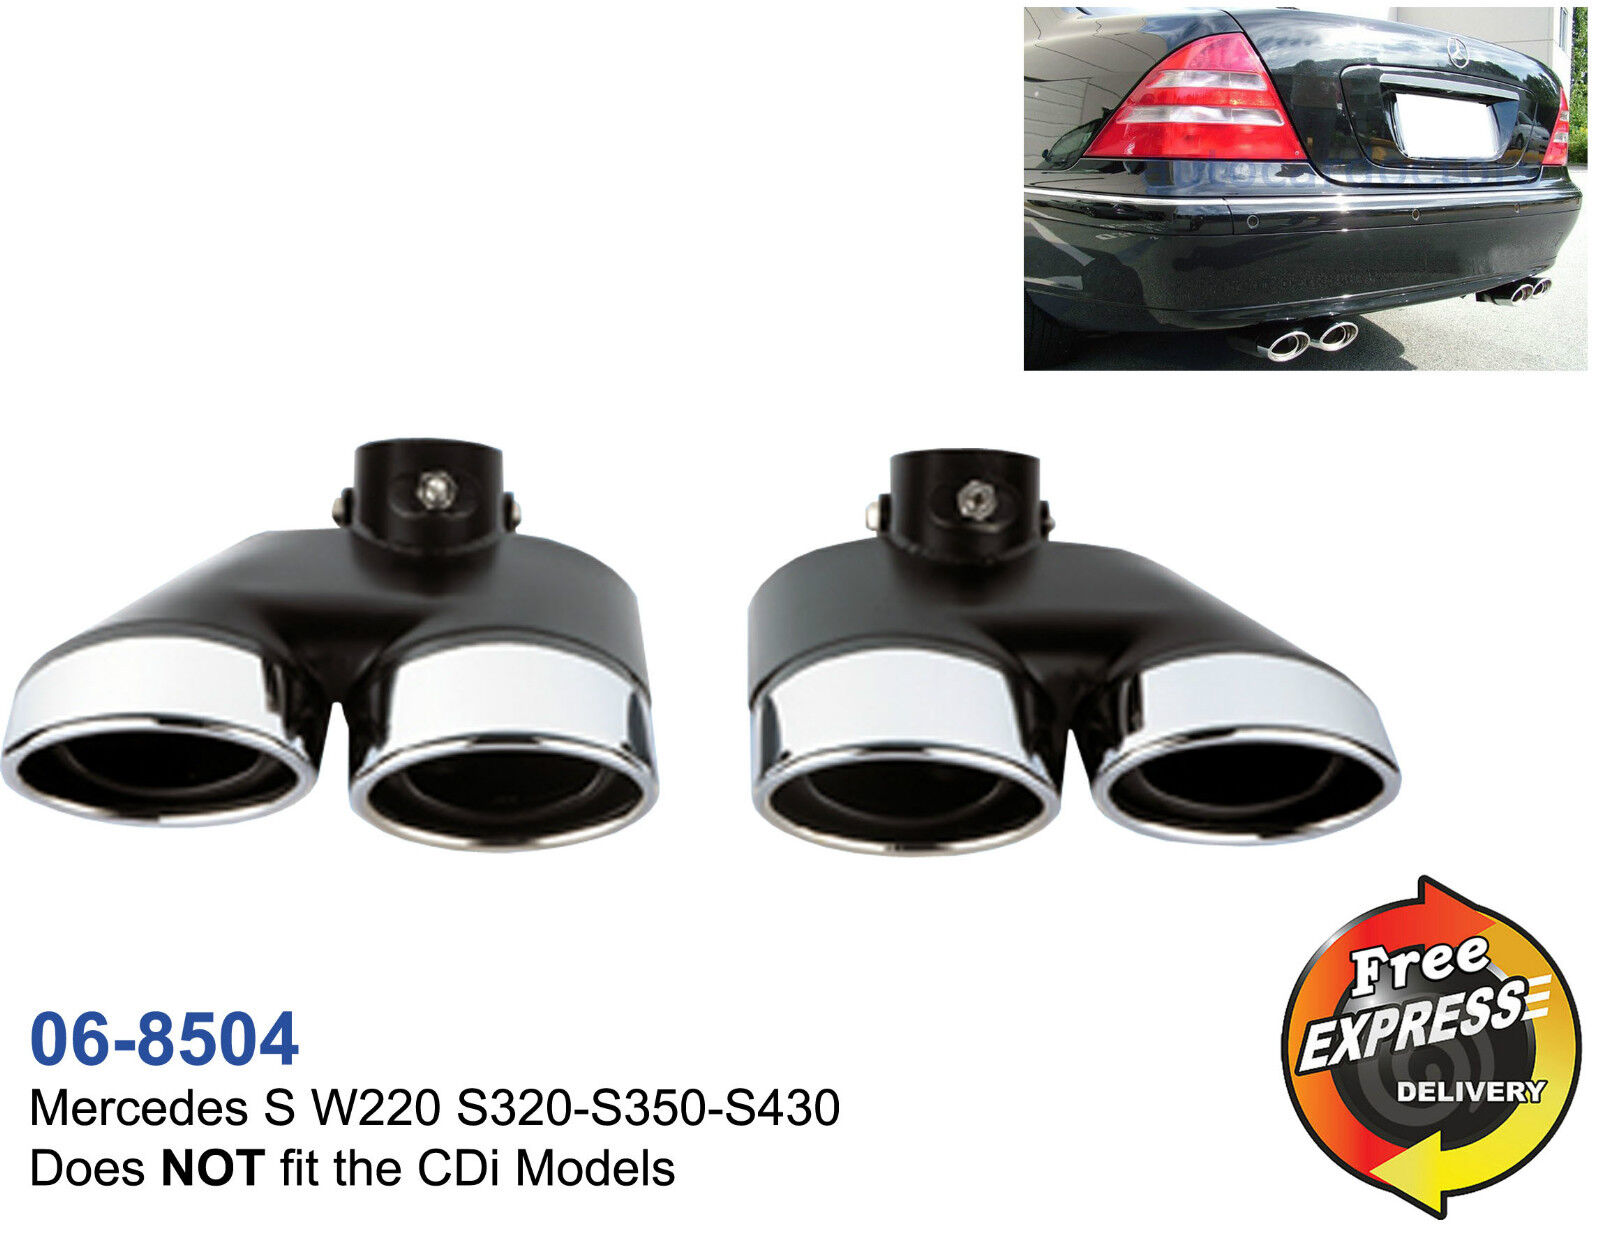 Exhaust tips tailpipe trims for Mercedes Benz S W220 S320 S350 S430 / 06-8504